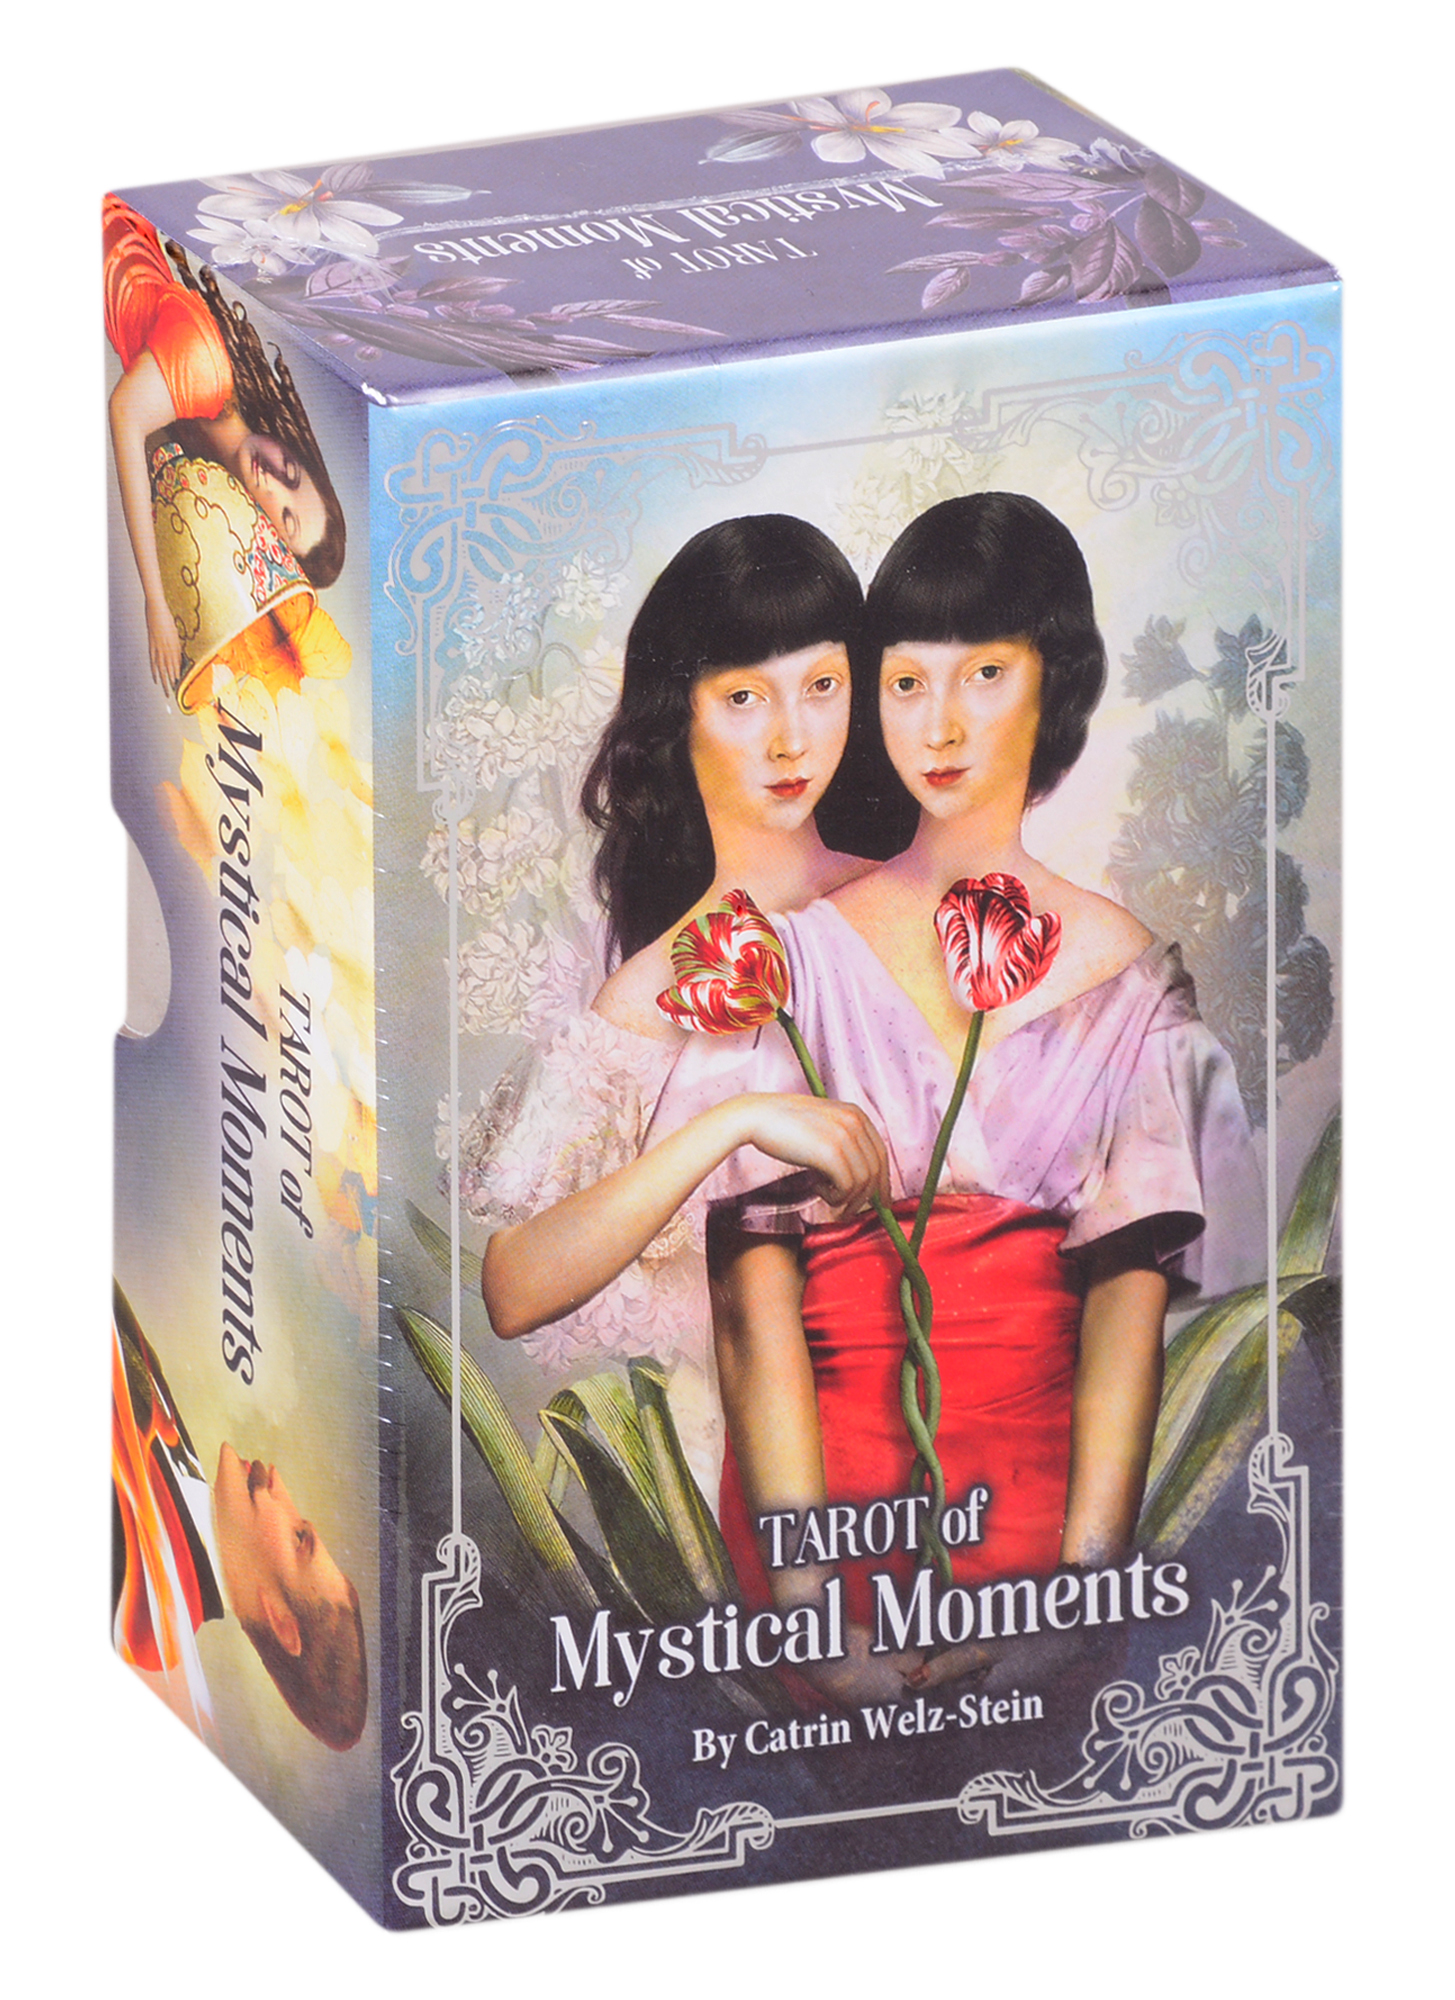 Tarot of Mystical Moments (96 карт) blue bird fortune telling decks oracle cards deck and pdf guidebook cards divination tarot cards for beginners